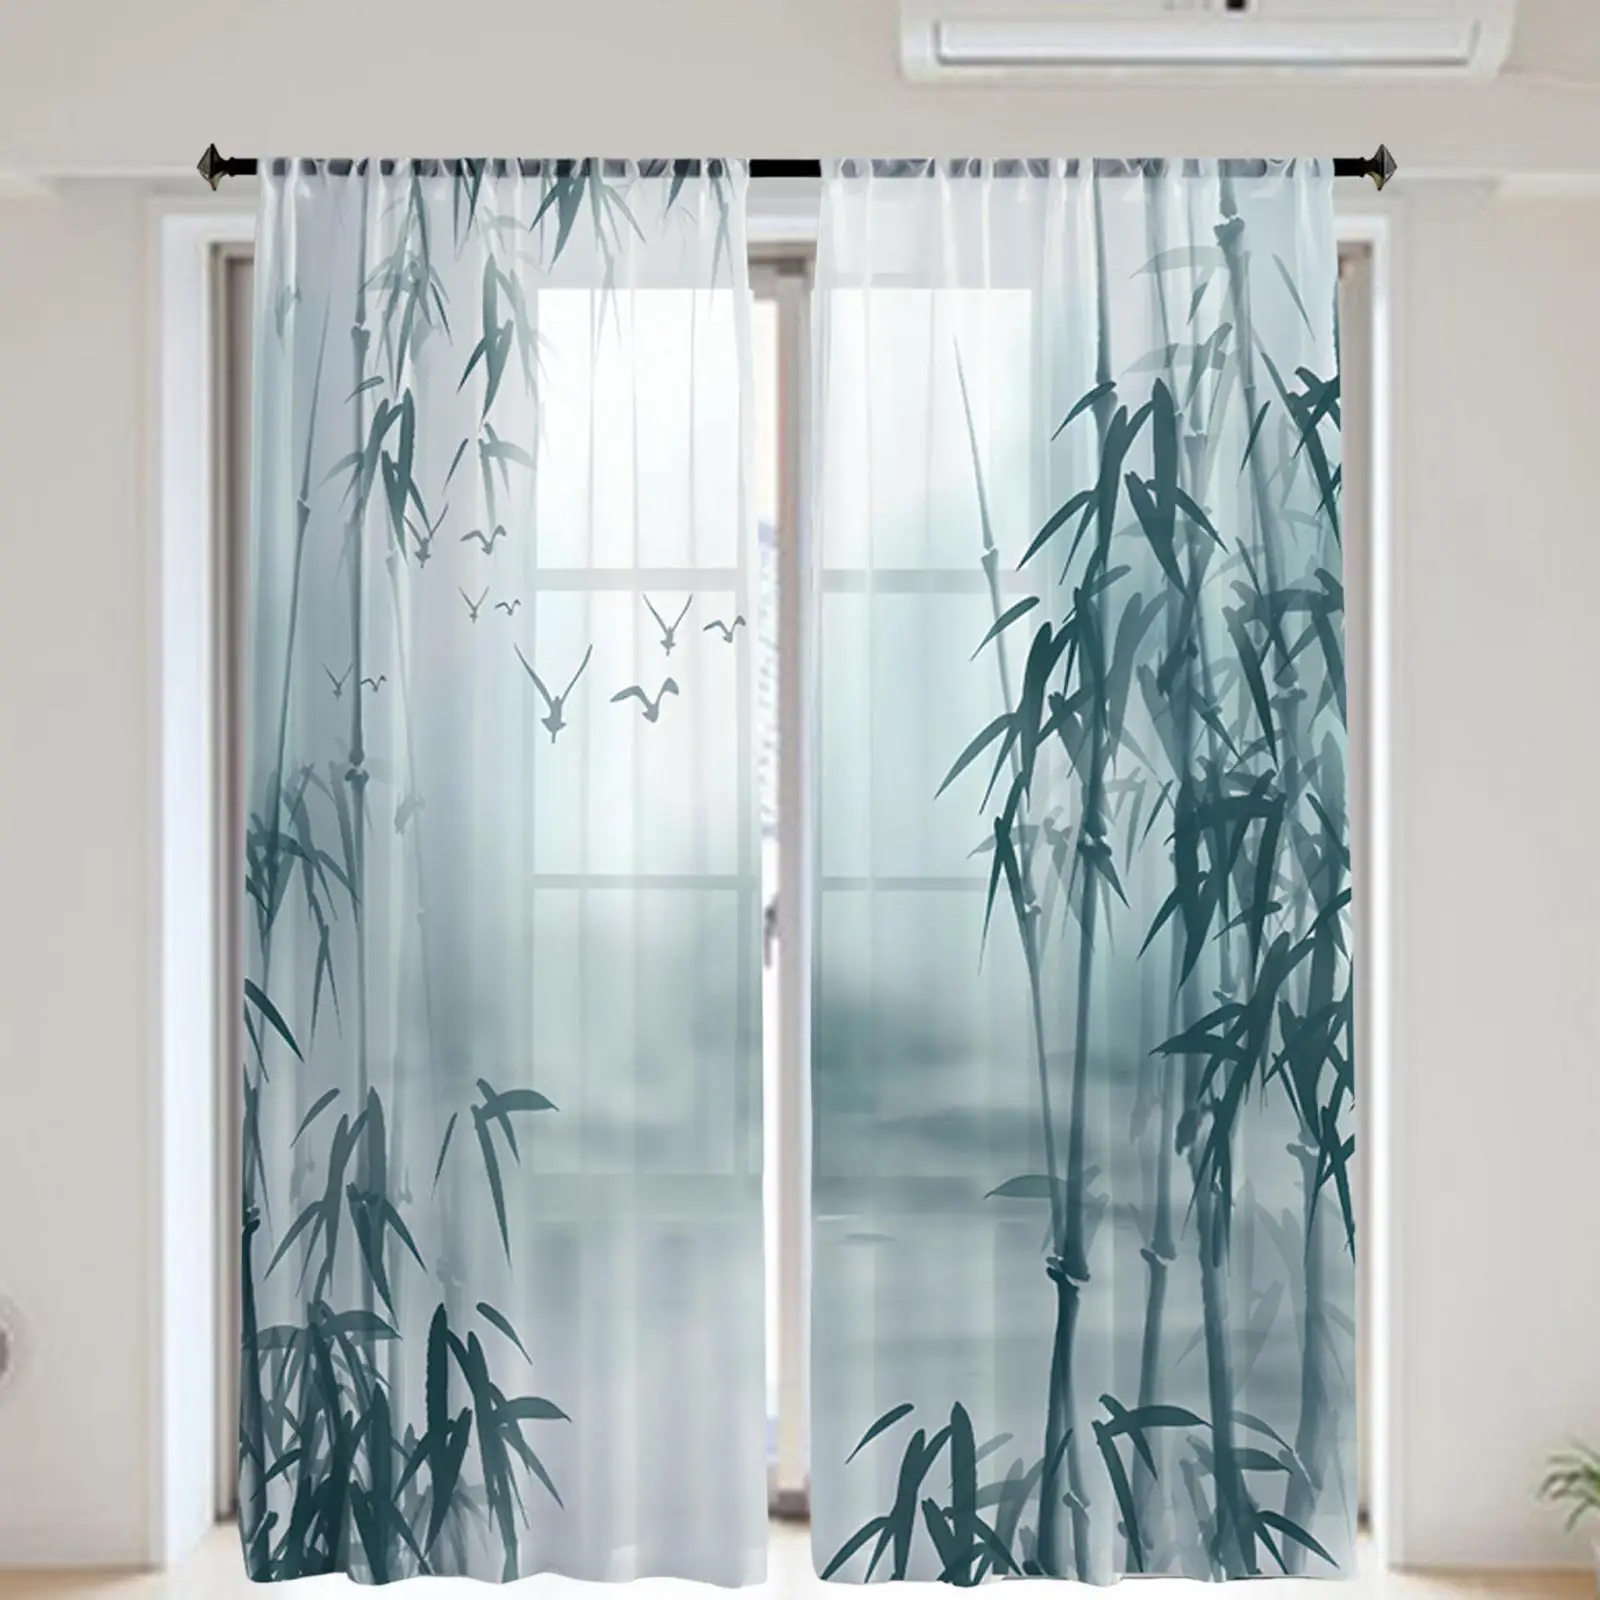 Bamboo Print Sheer Curtains Drapes Polyester Fiber Convenient Assemble Accessories Versatile Privacy Drapes for Living Room